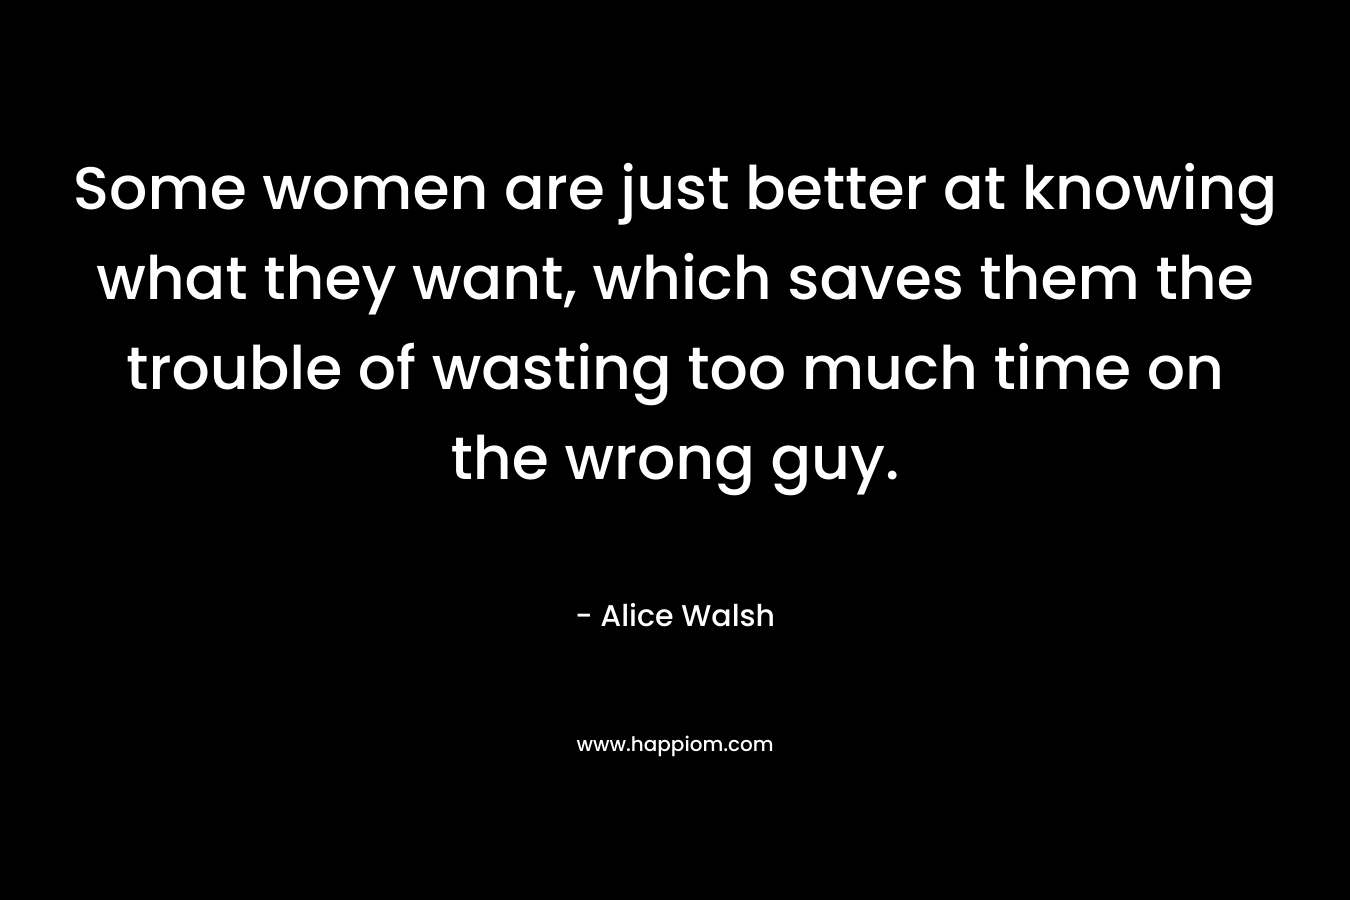 Some women are just better at knowing what they want, which saves them the trouble of wasting too much time on the wrong guy.